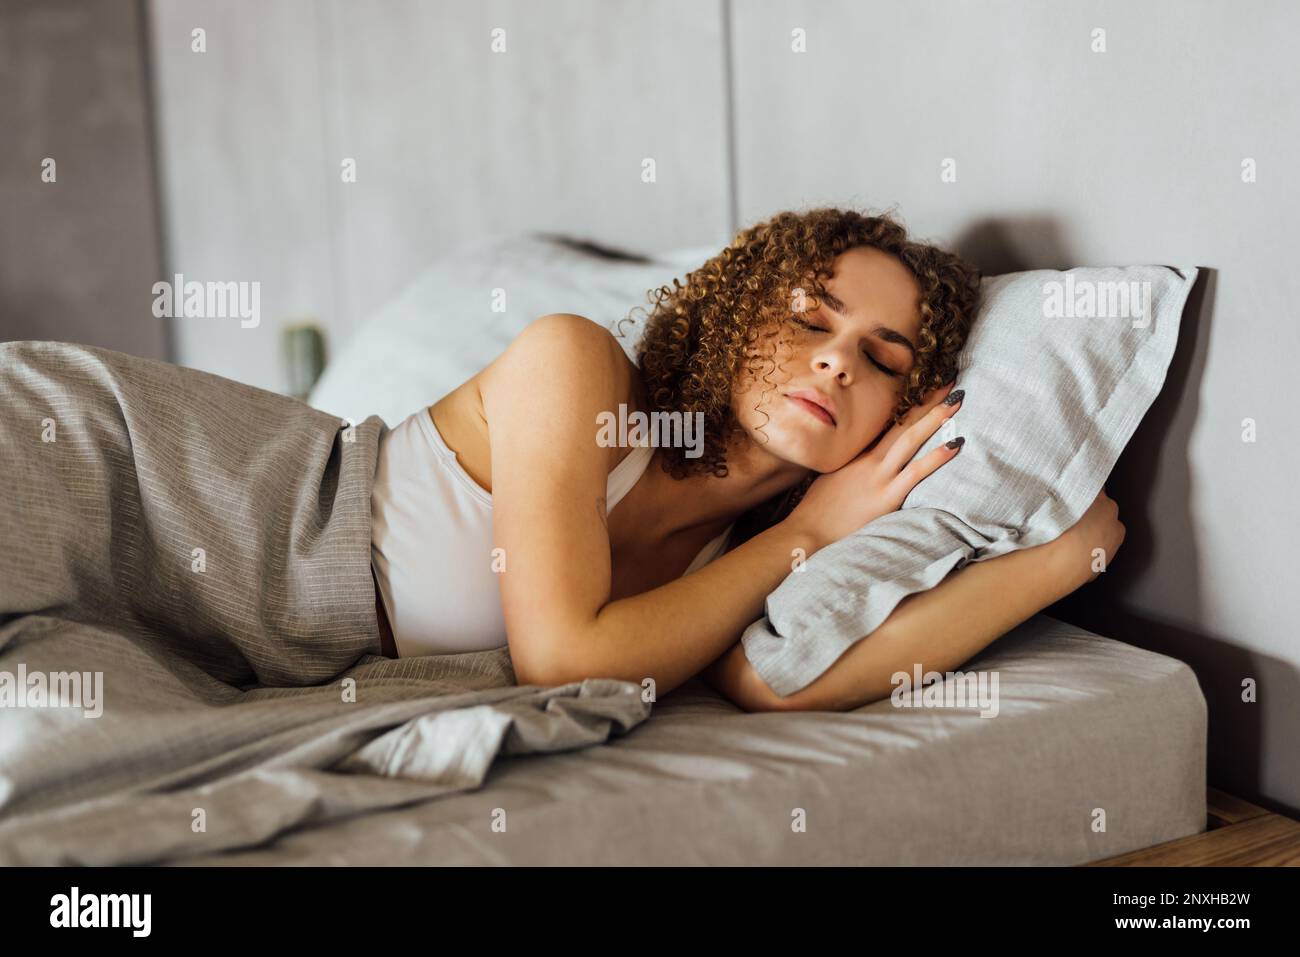 Feeling calmness. Sleepy female keeping eyes closed while dreaming about future vacation or sleeping at the bedroom. Stock Photo